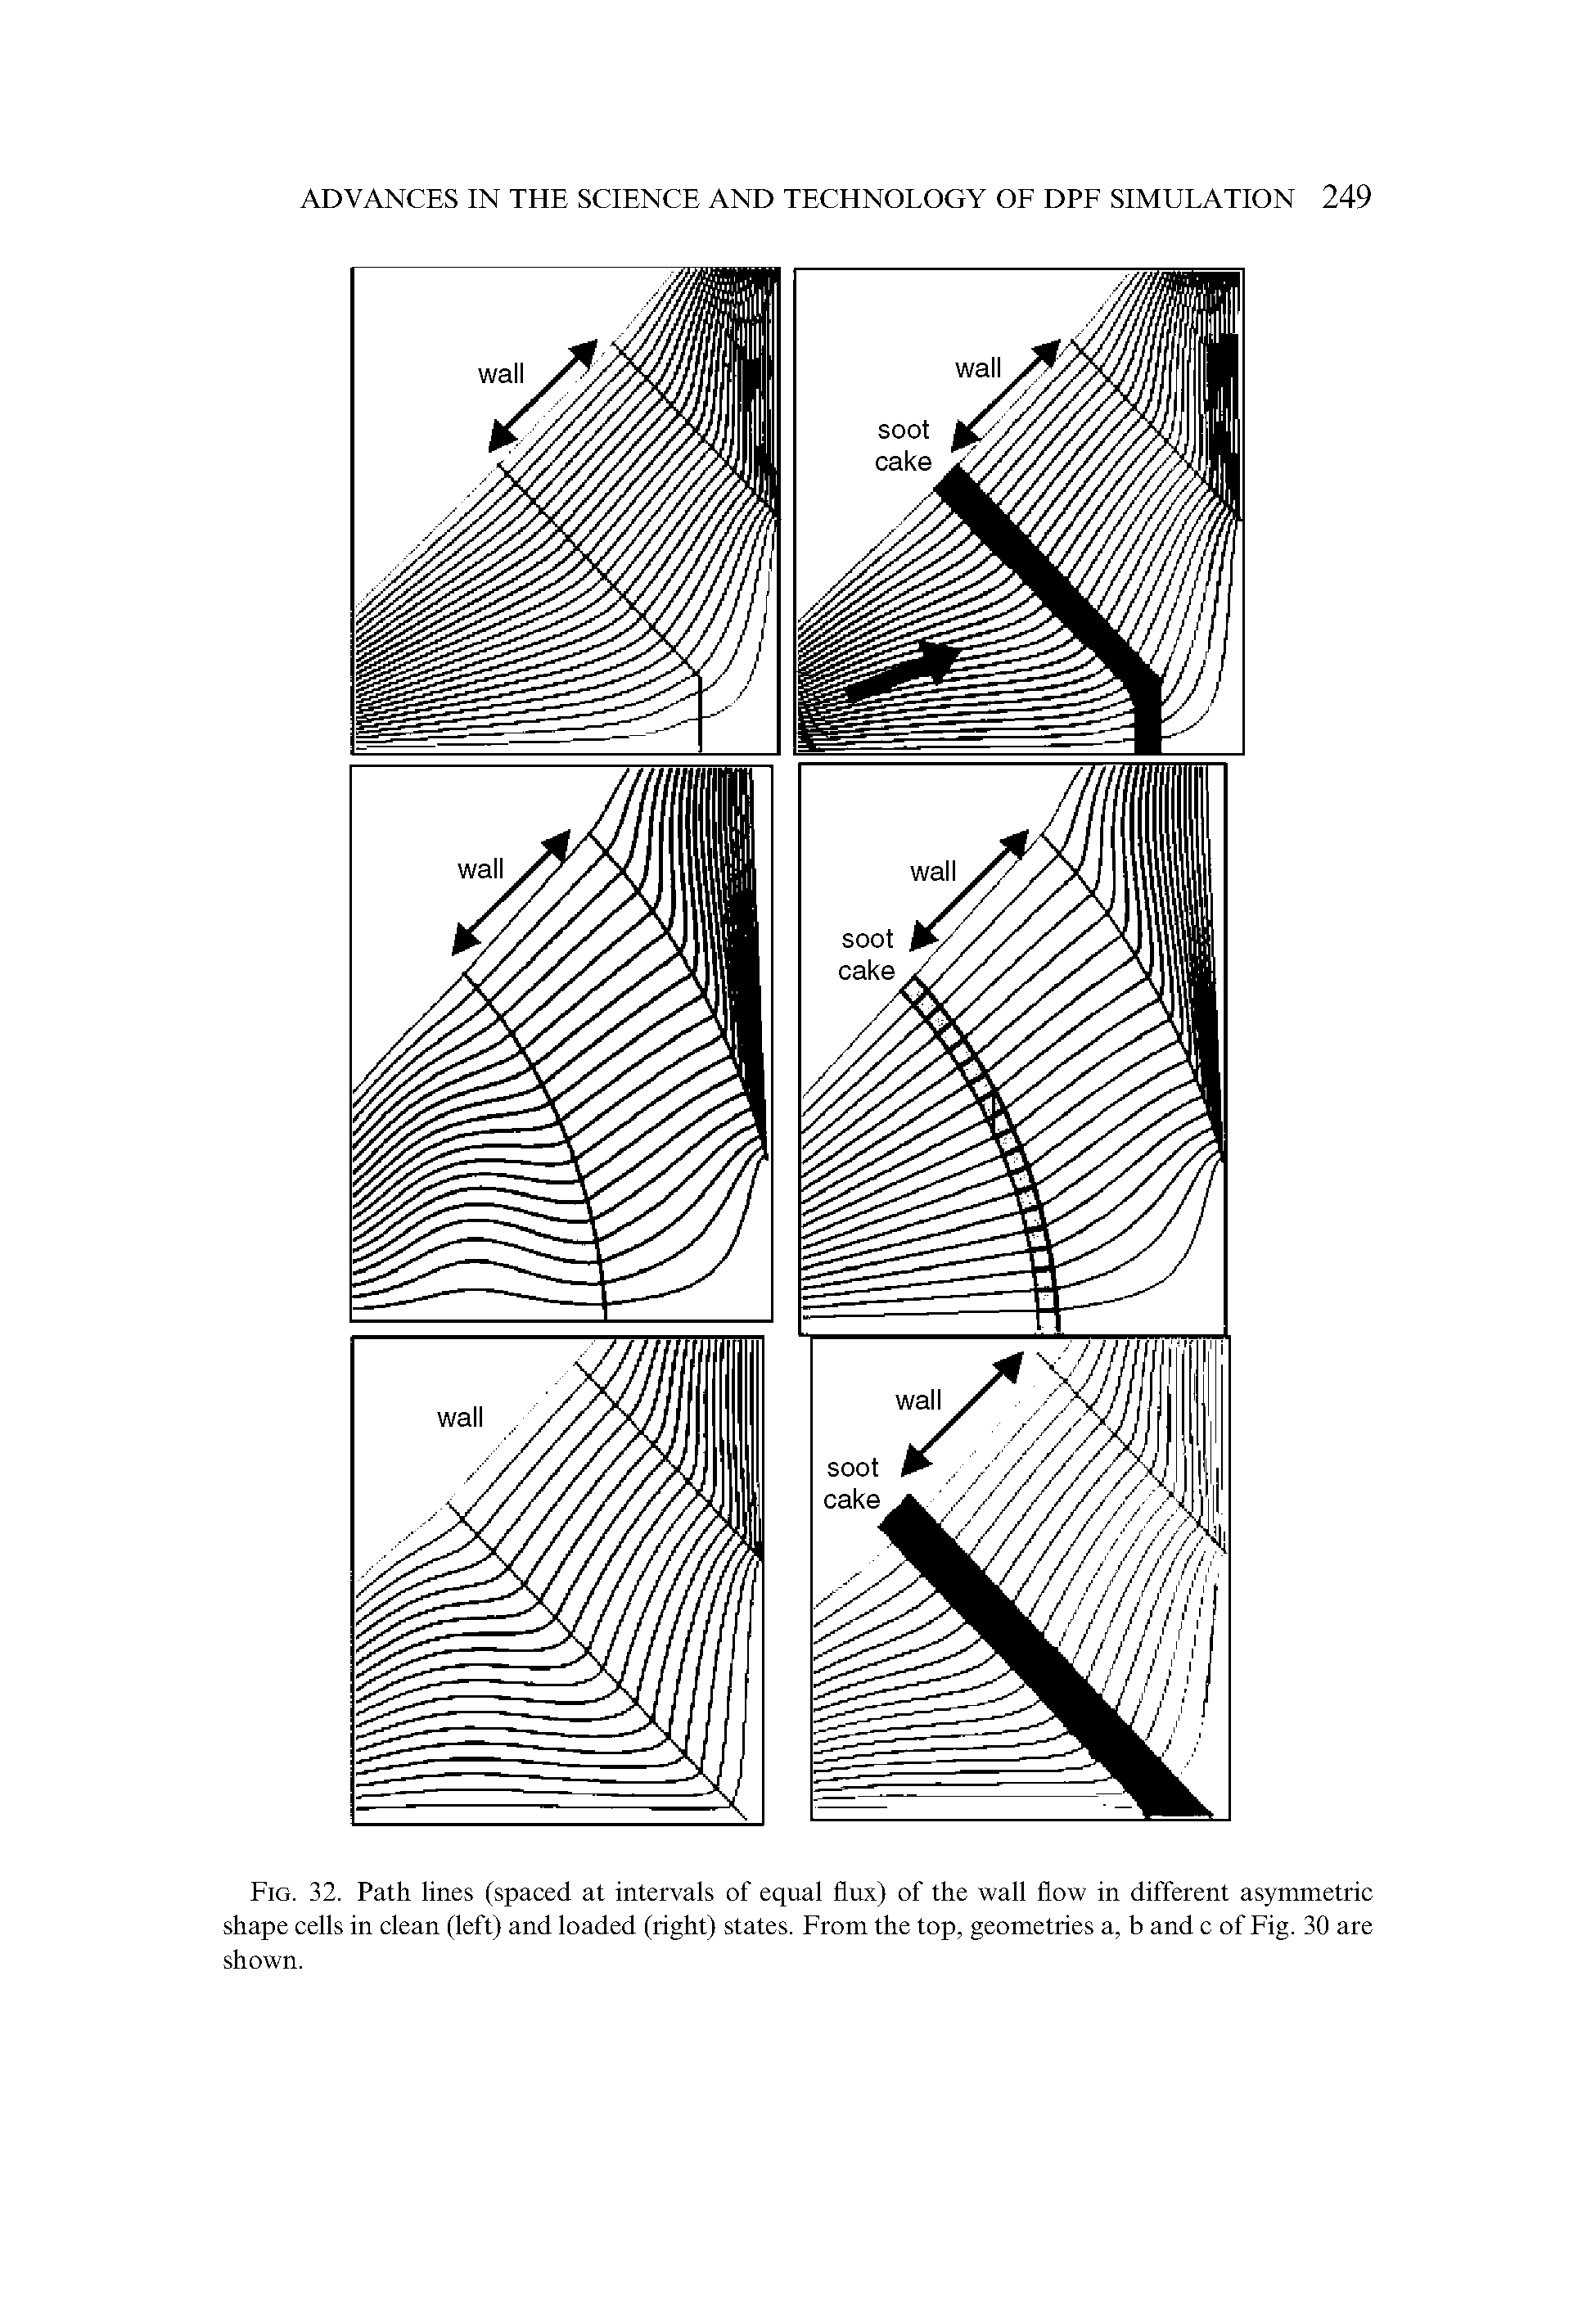 Fig. 32. Path lines (spaced at intervals of equal flux) of the wall flow in different asymmetric shape cells in clean (left) and loaded (right) states. From the top, geometries a, b and c of Fig. 30 are shown.